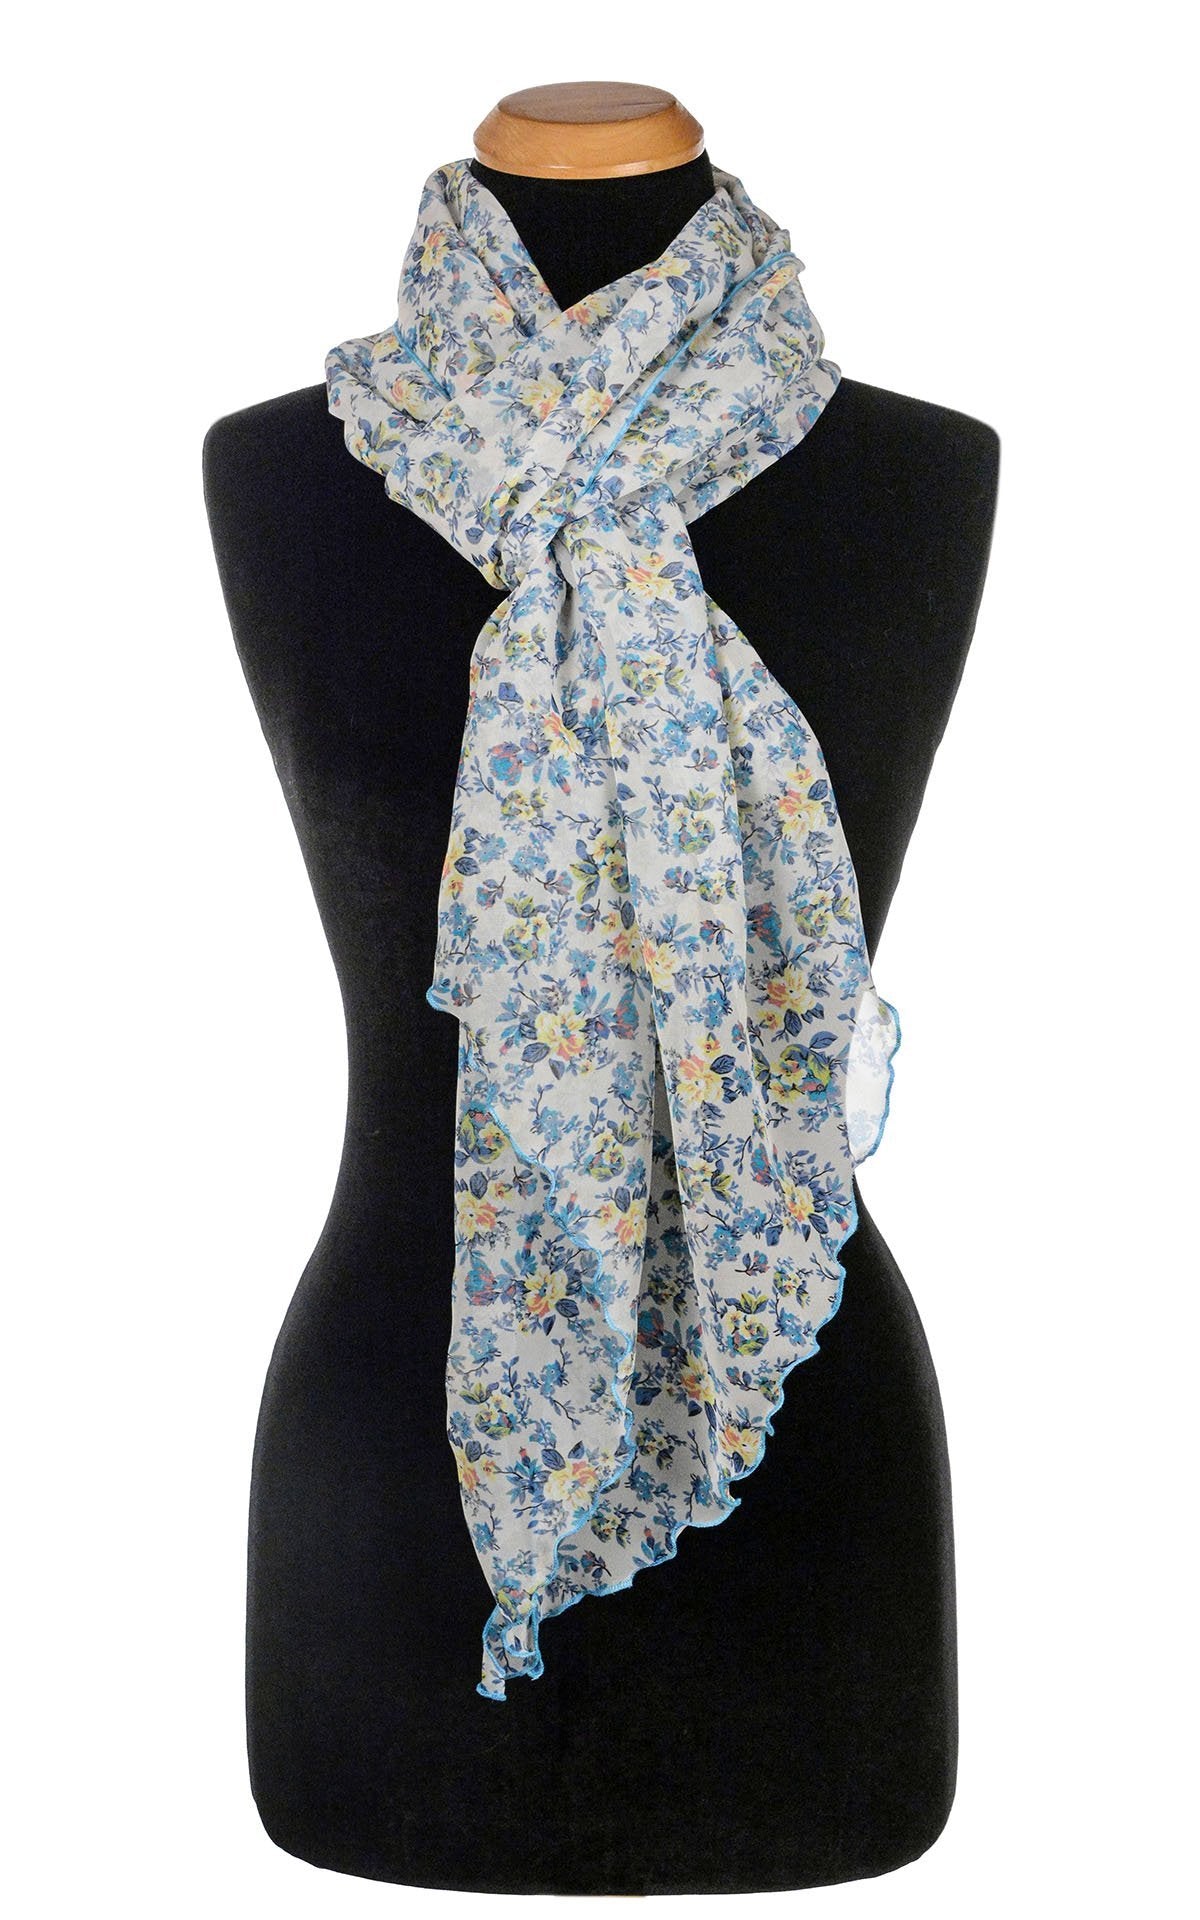 Women’s Large Handkerchief Scarf, Wrap on Mannequin shown looped | Victory Garden Chiffon floral print in blues and ivory| Handmade in Seattle WA | Pandemonium Millinery